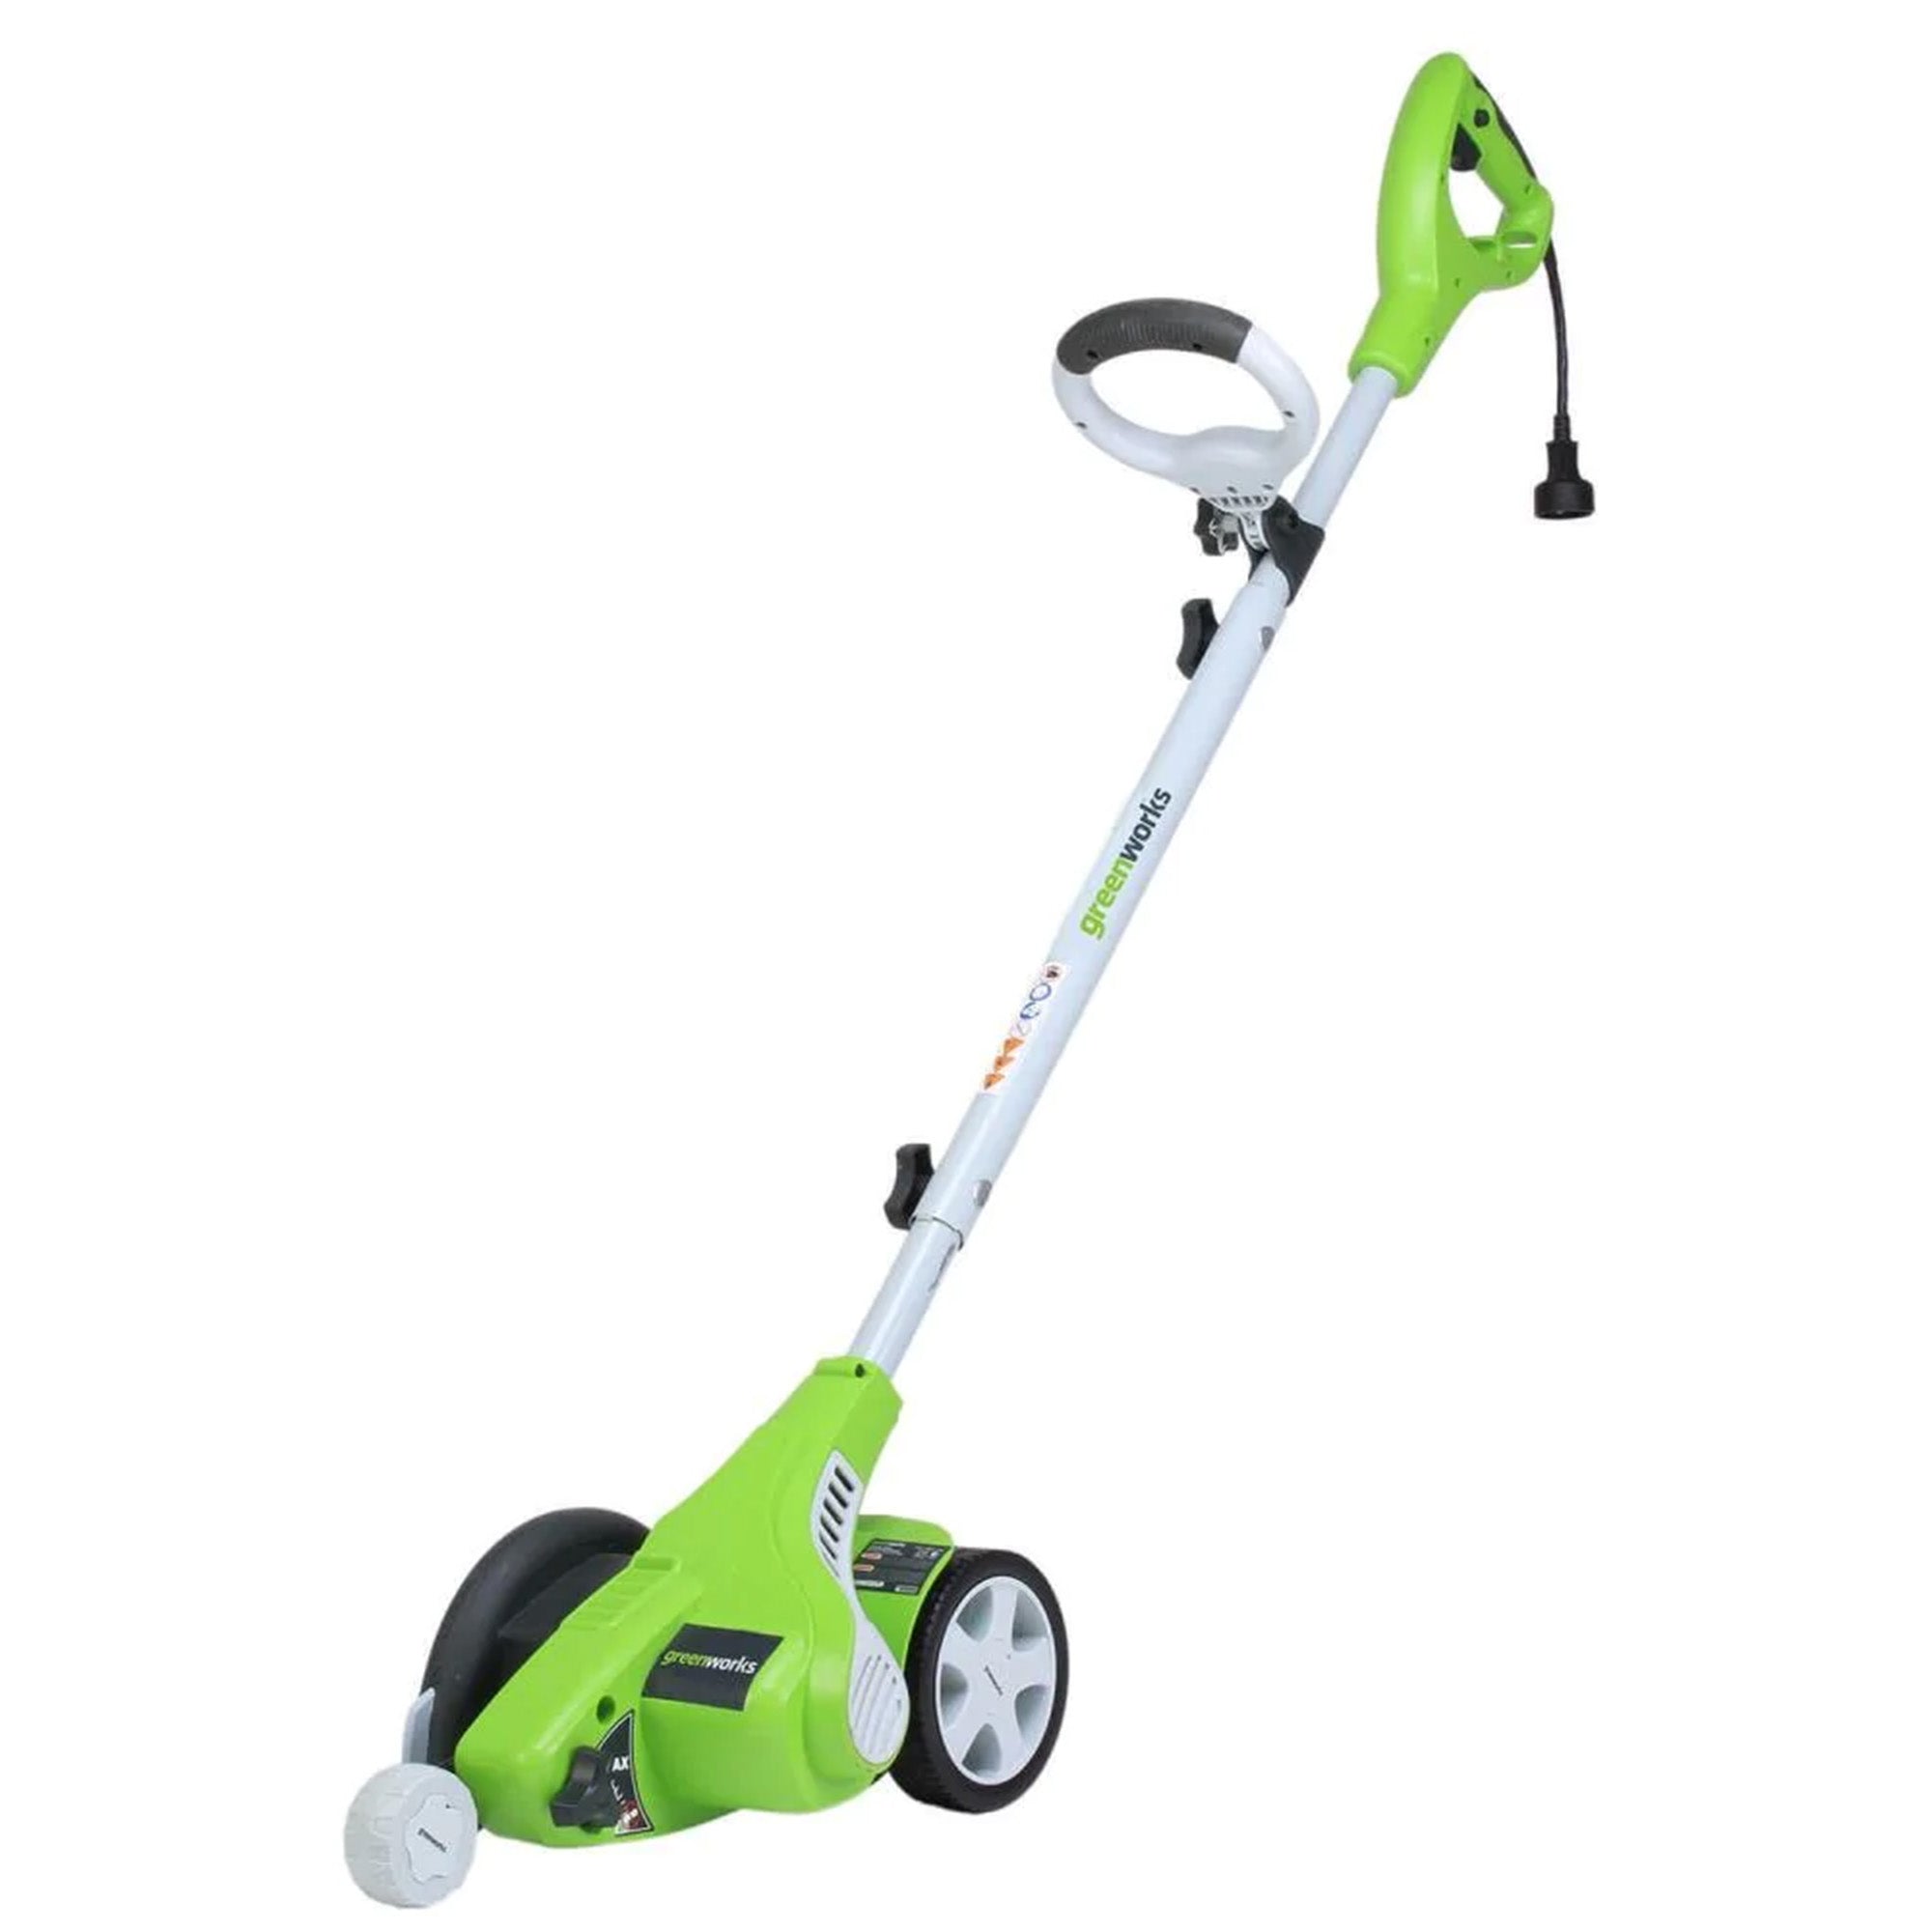 Image of Greenworks 12 Amp Electric Corded Edger